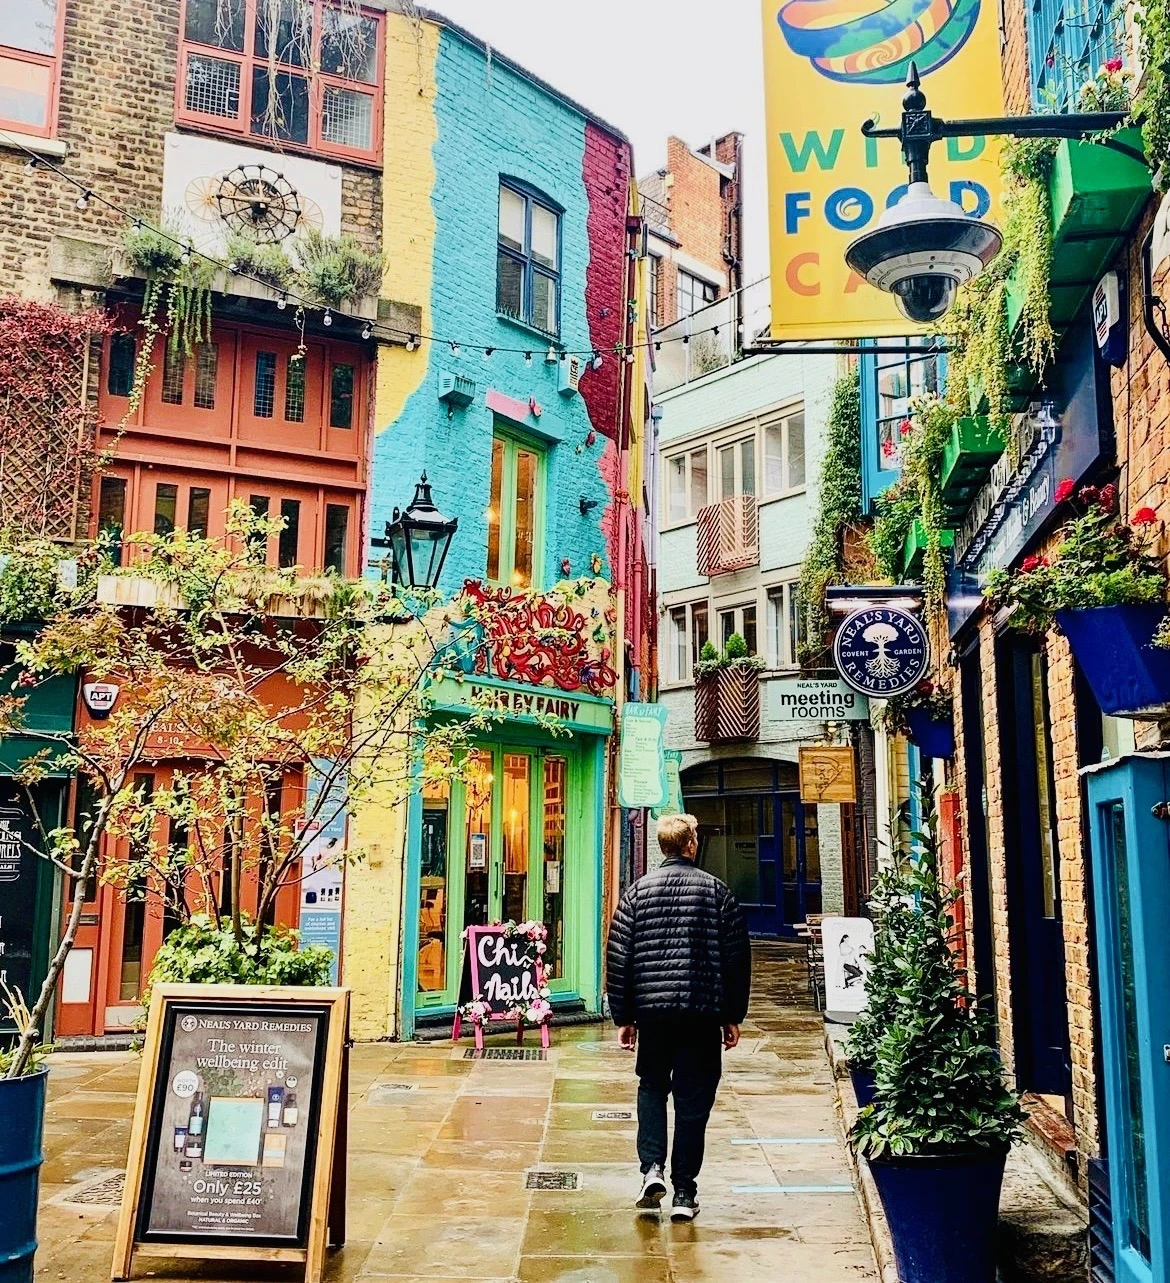 Neal's Yard in Covent Garden is incredible when you visit London